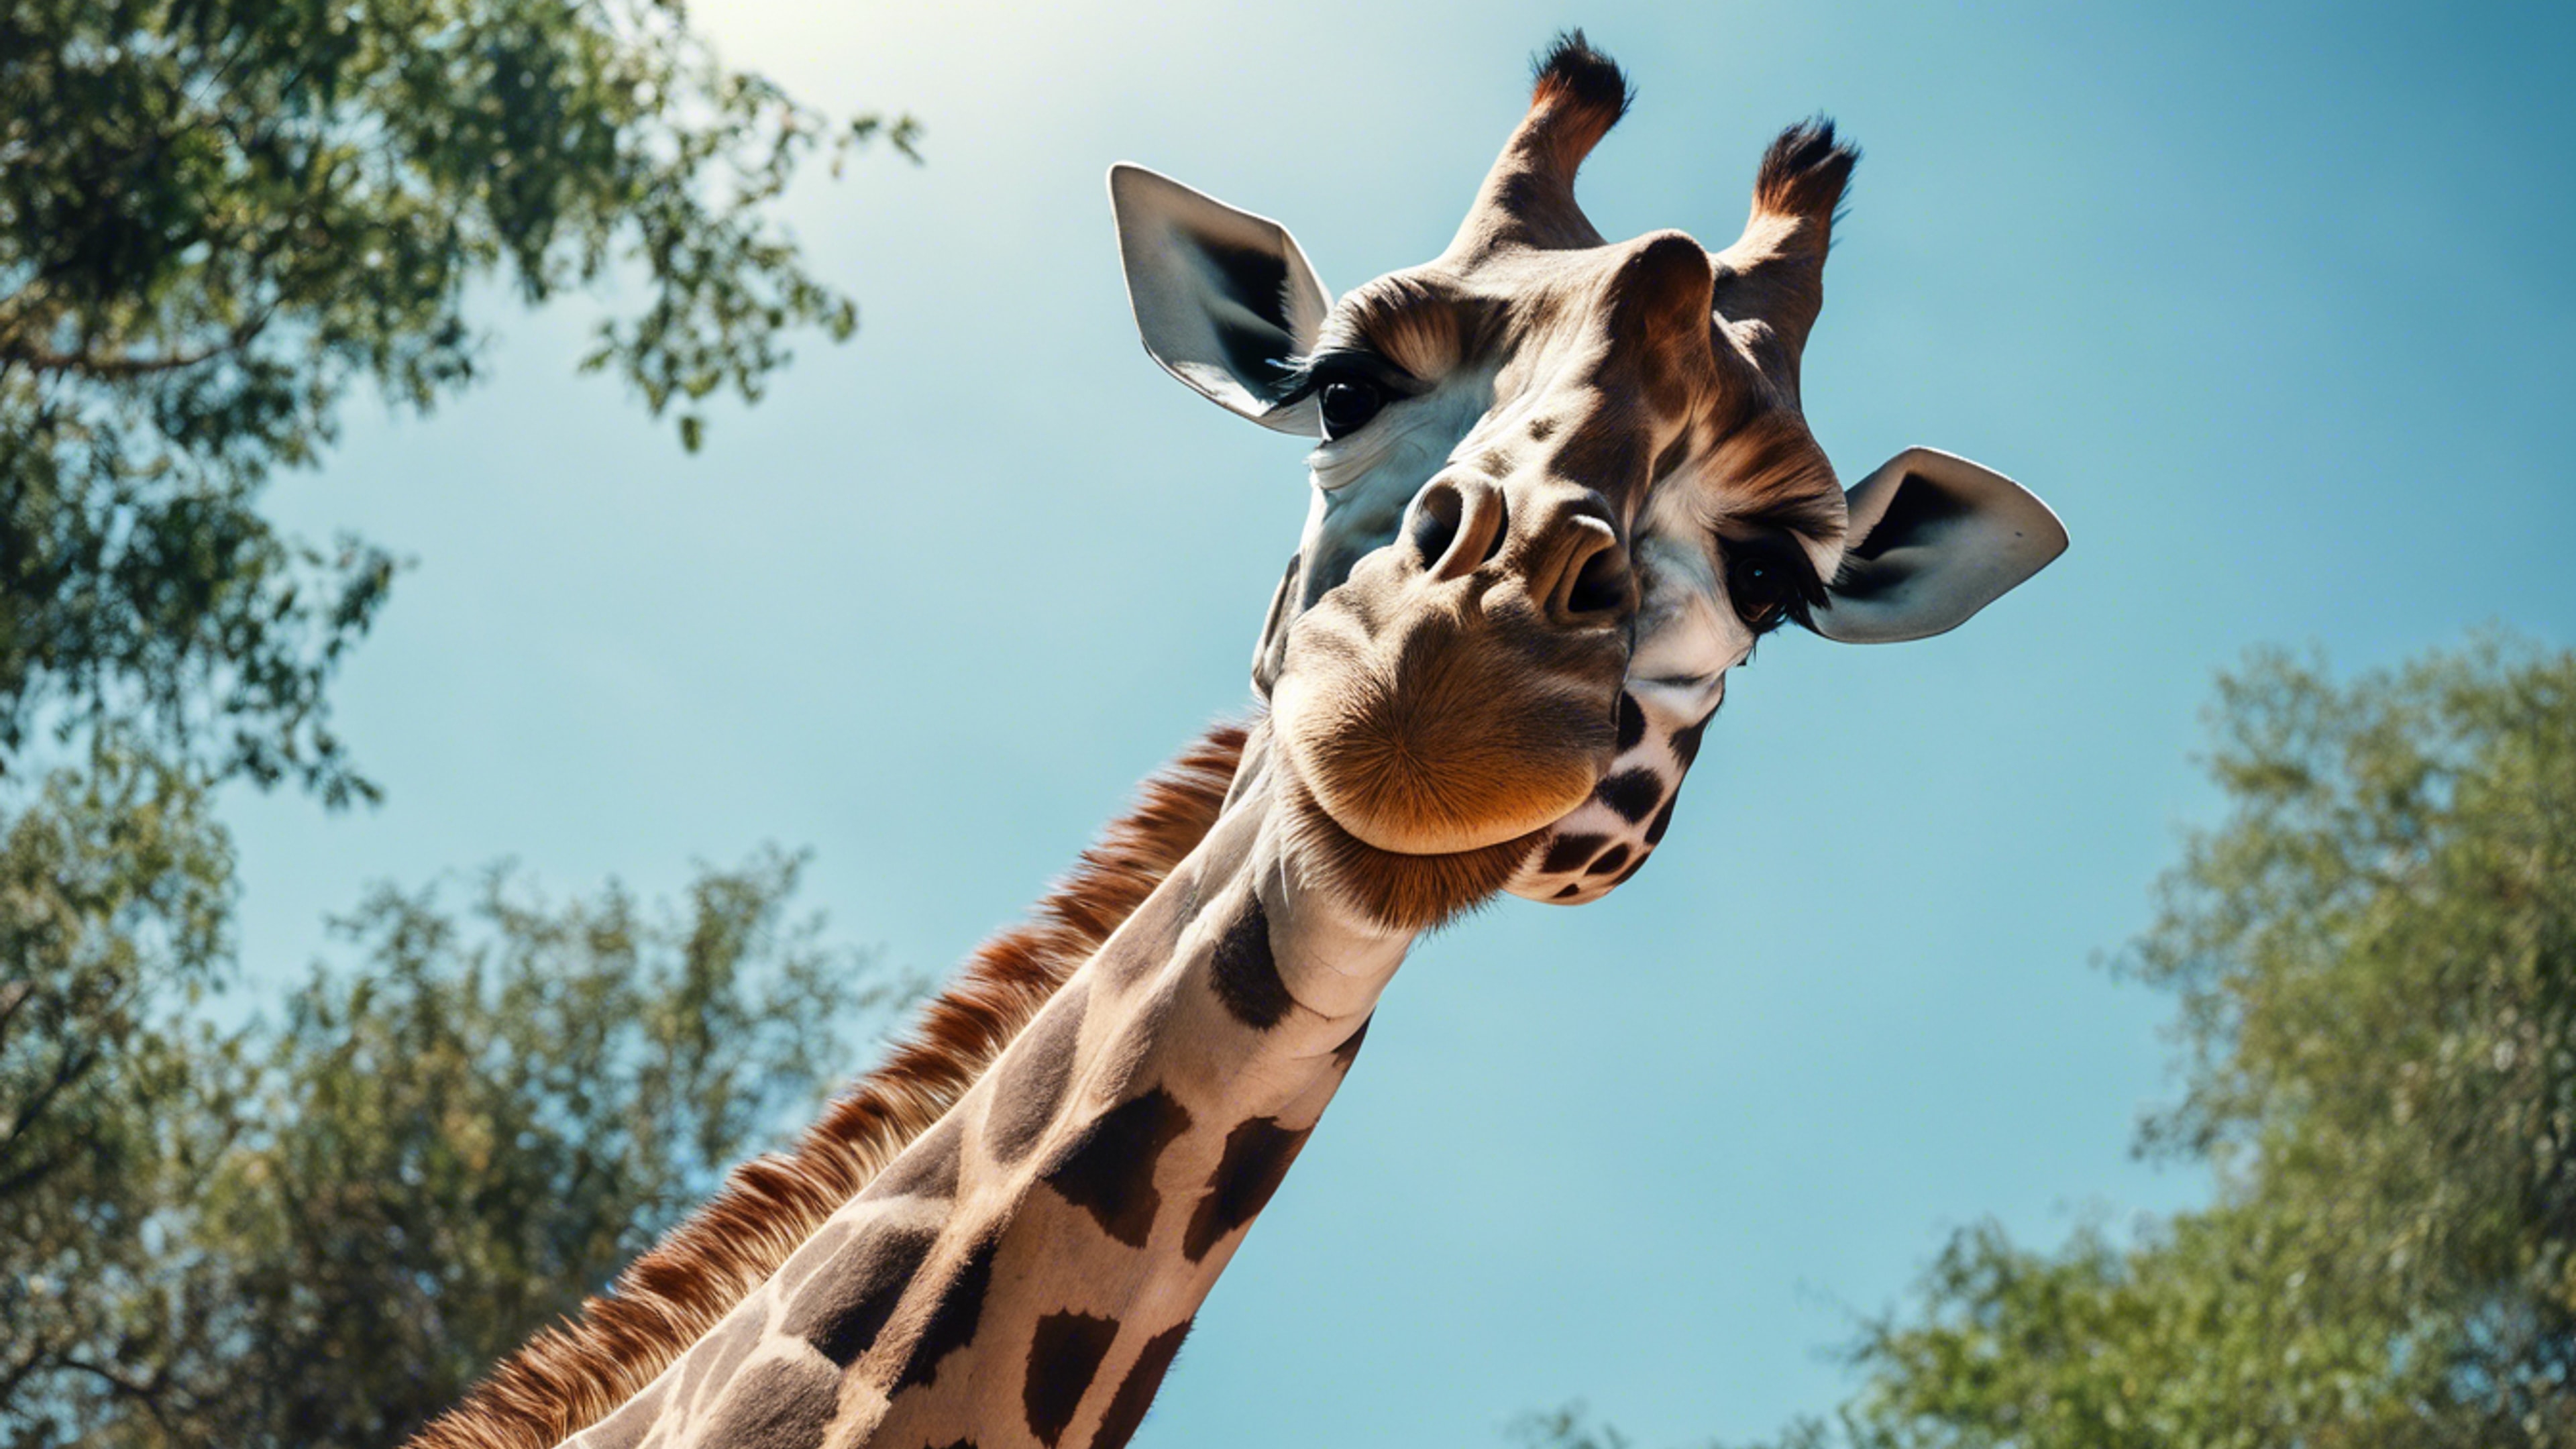 A picture from a below angle showing the towering magnificence of a giraffe against a clear blue sky. 牆紙[8a88956d9aa2483bb204]